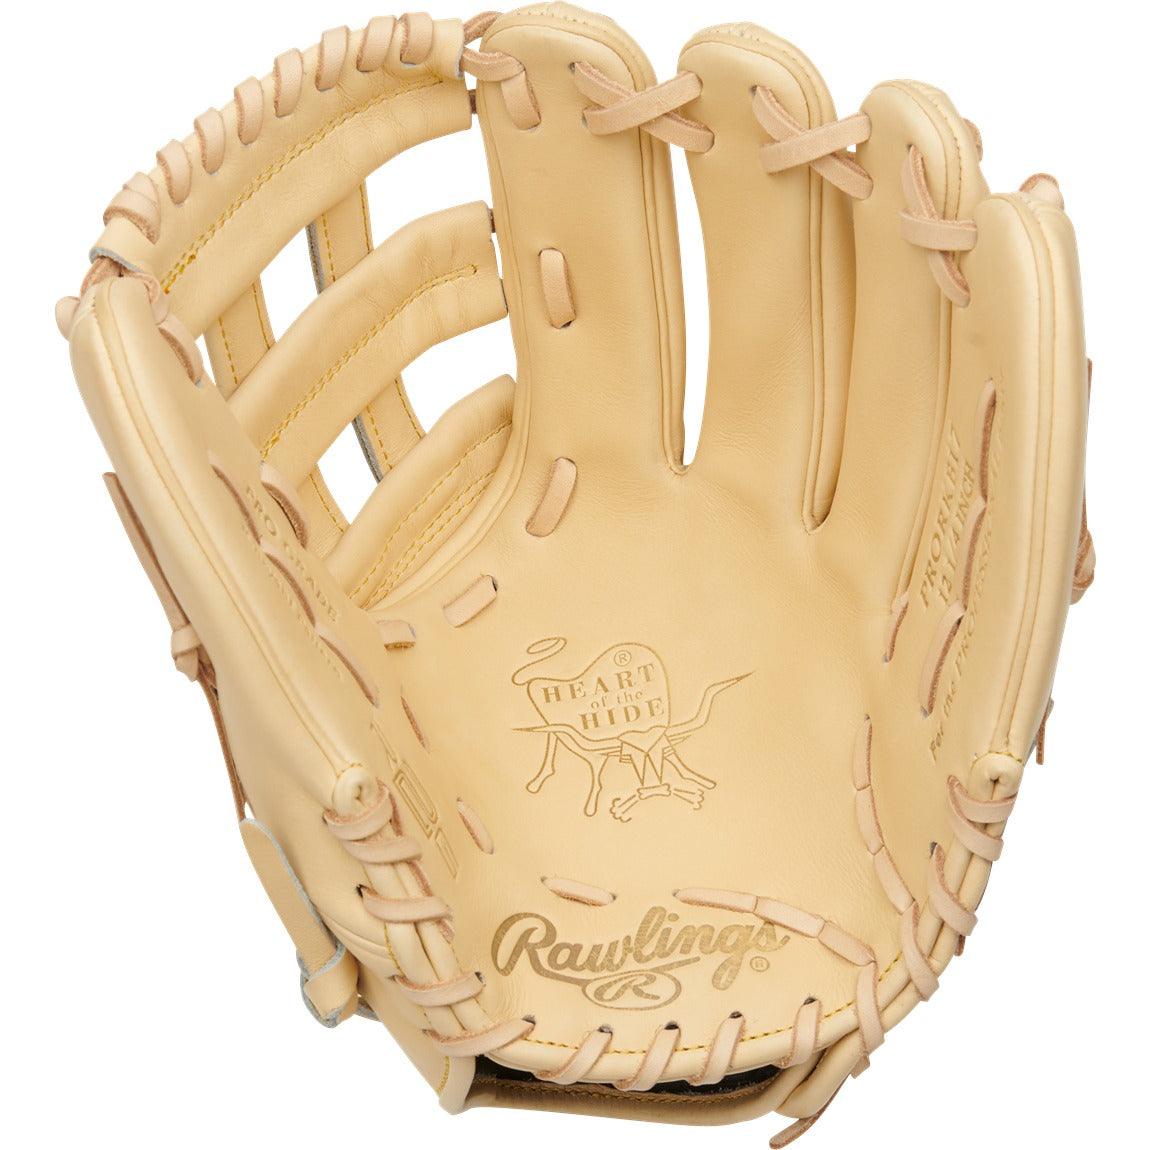 Heart Of The Hide 12.25" R2G Narrow Fit Baseball Glove - Sports Excellence